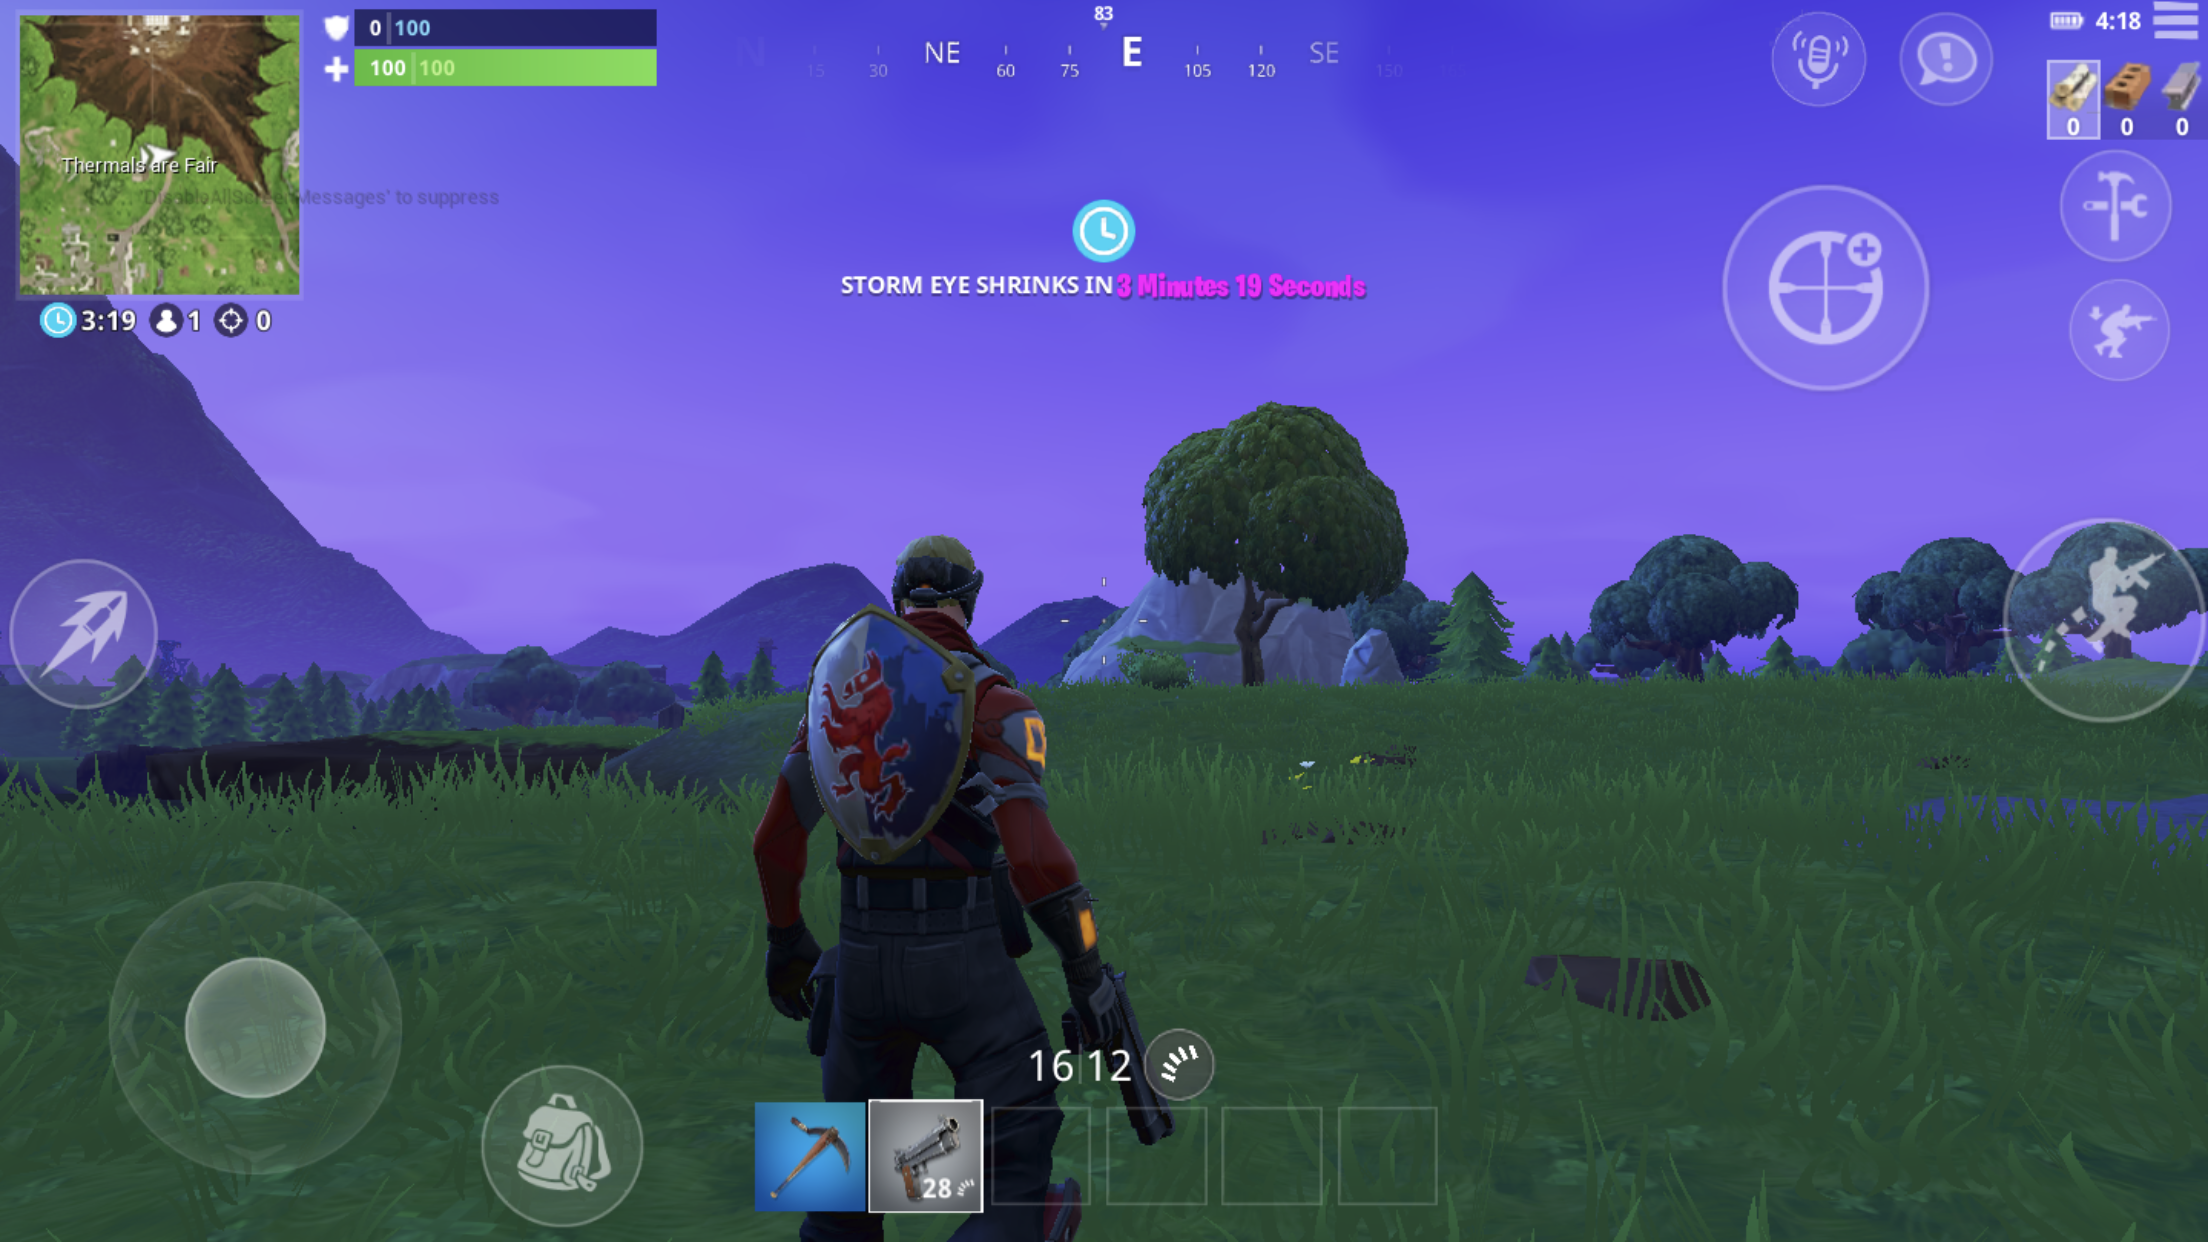 Customizable HUD - Fortnite for iOS gains customizable HUD, voice chat, Android version coming this summer